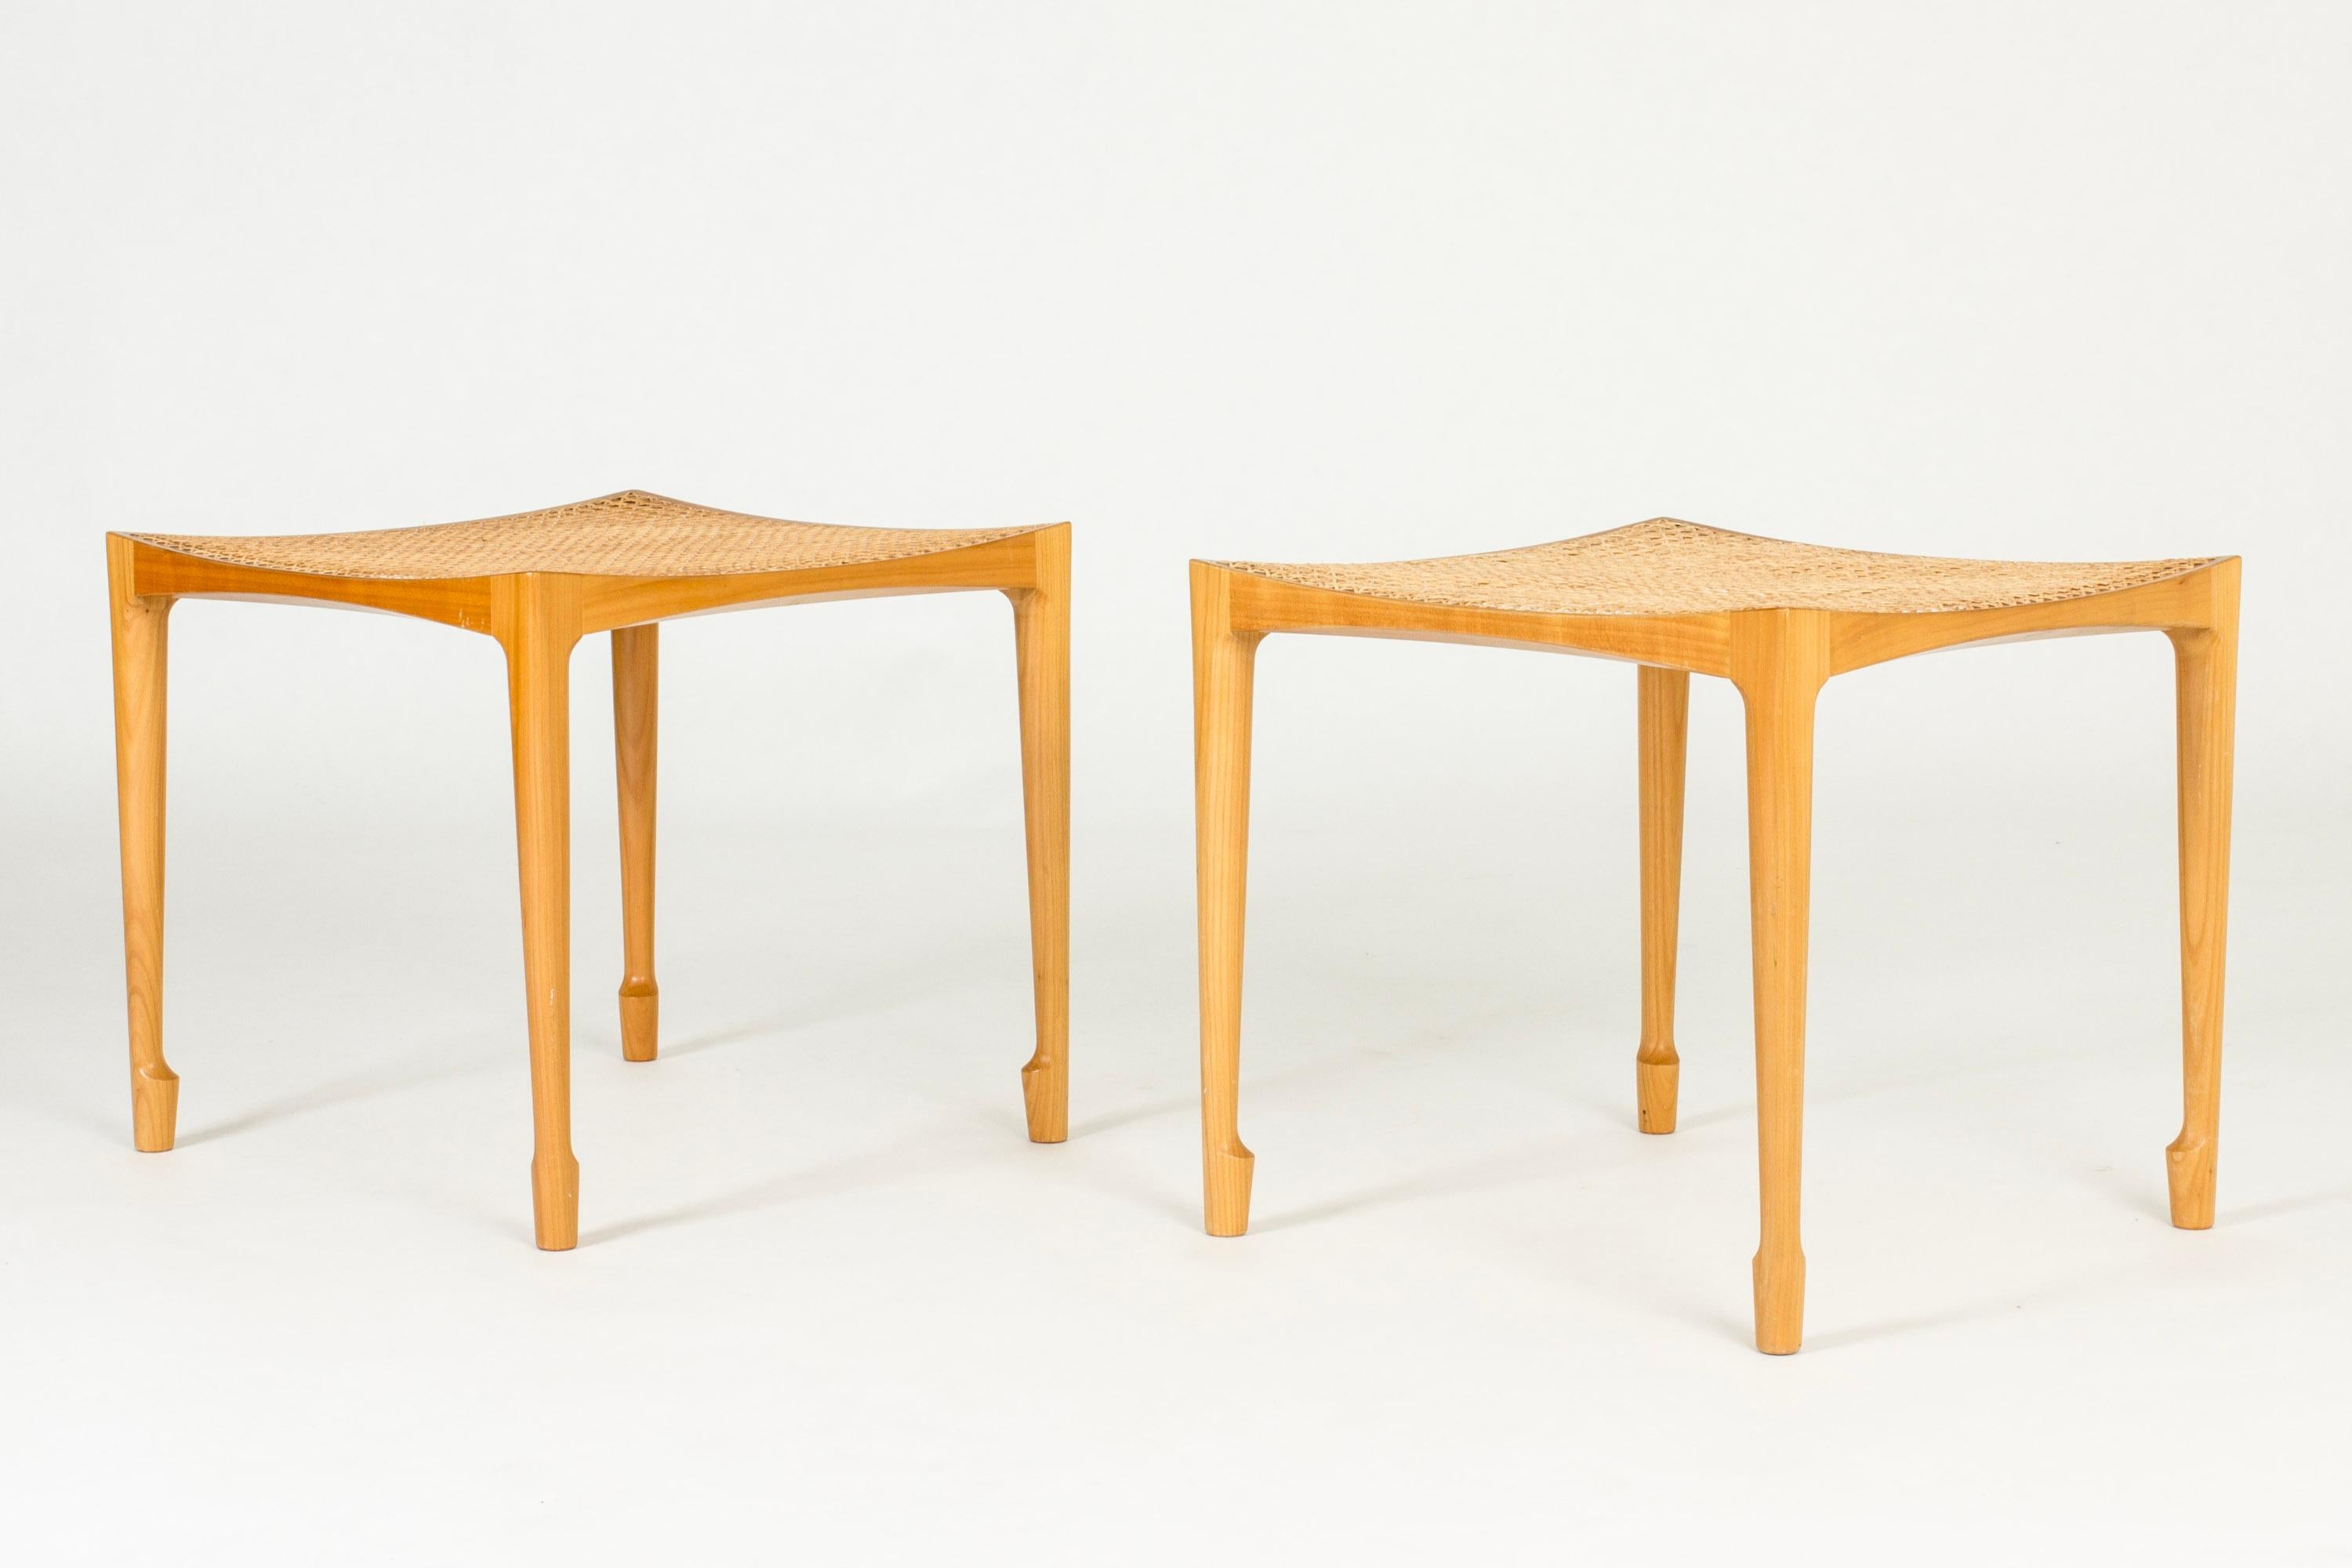 Pair of beautiful birch and rattan stools by Bernt Petersen. Beautiful, slender design with sculpted legs and seats that are subtly concave.